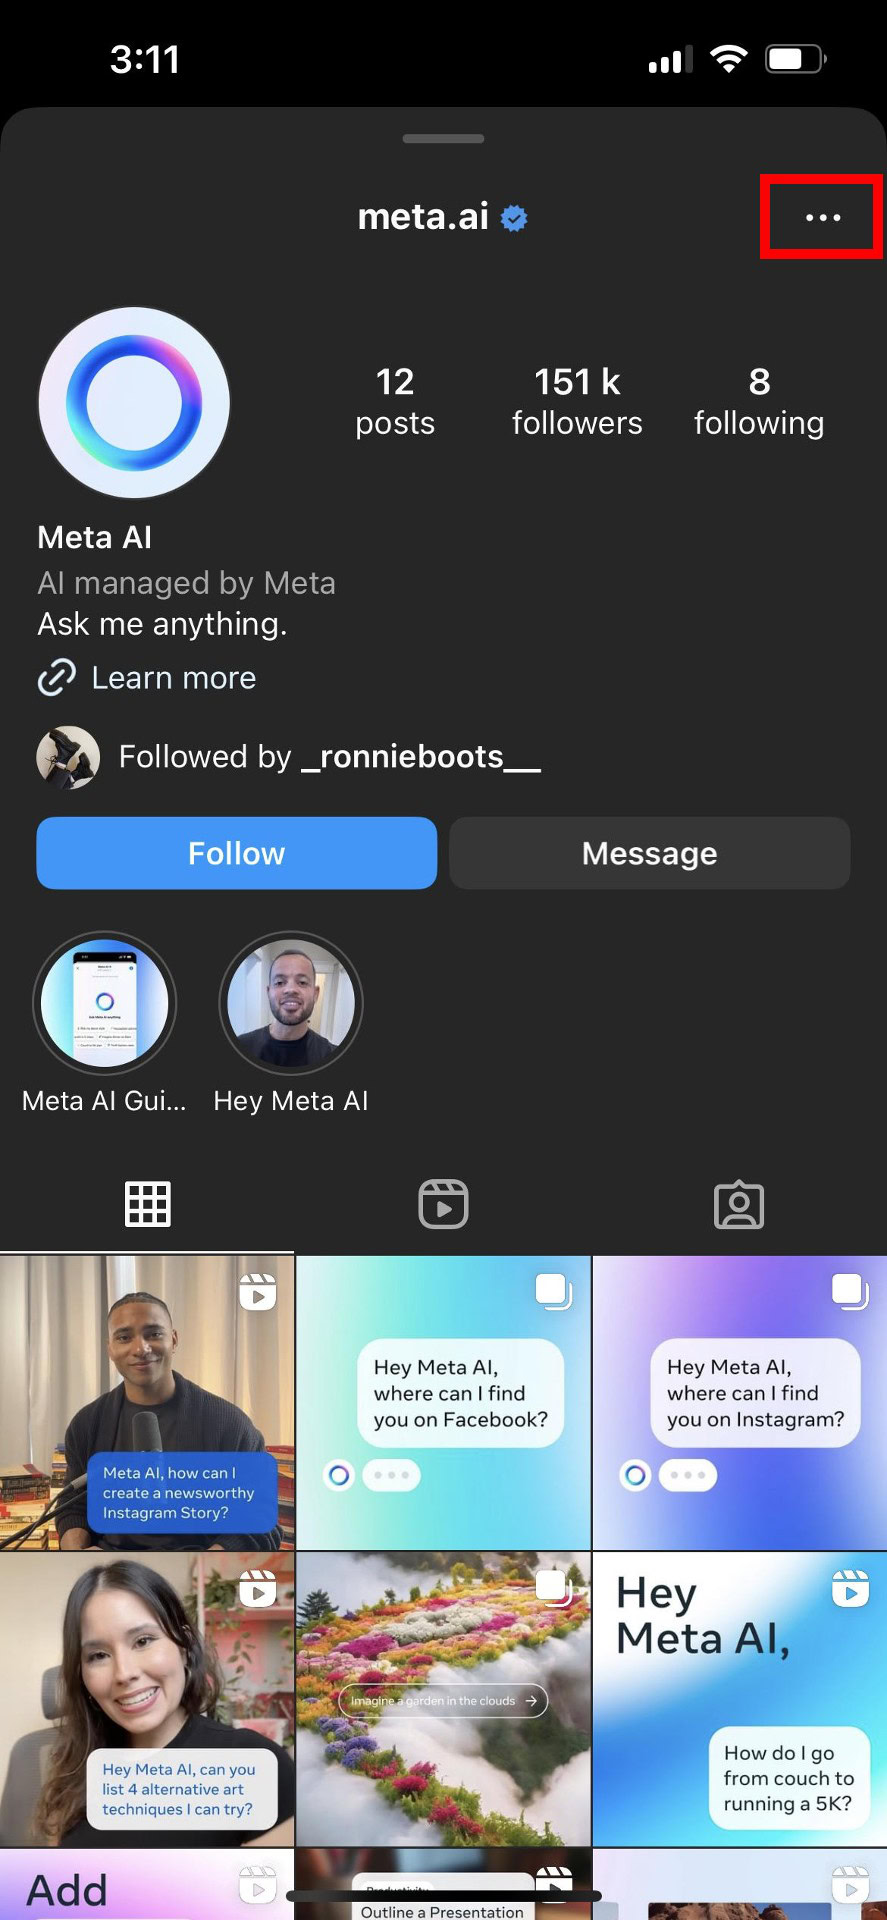 Can you turn off Meta AI on Facebook, Instagram, and WhatsApp?